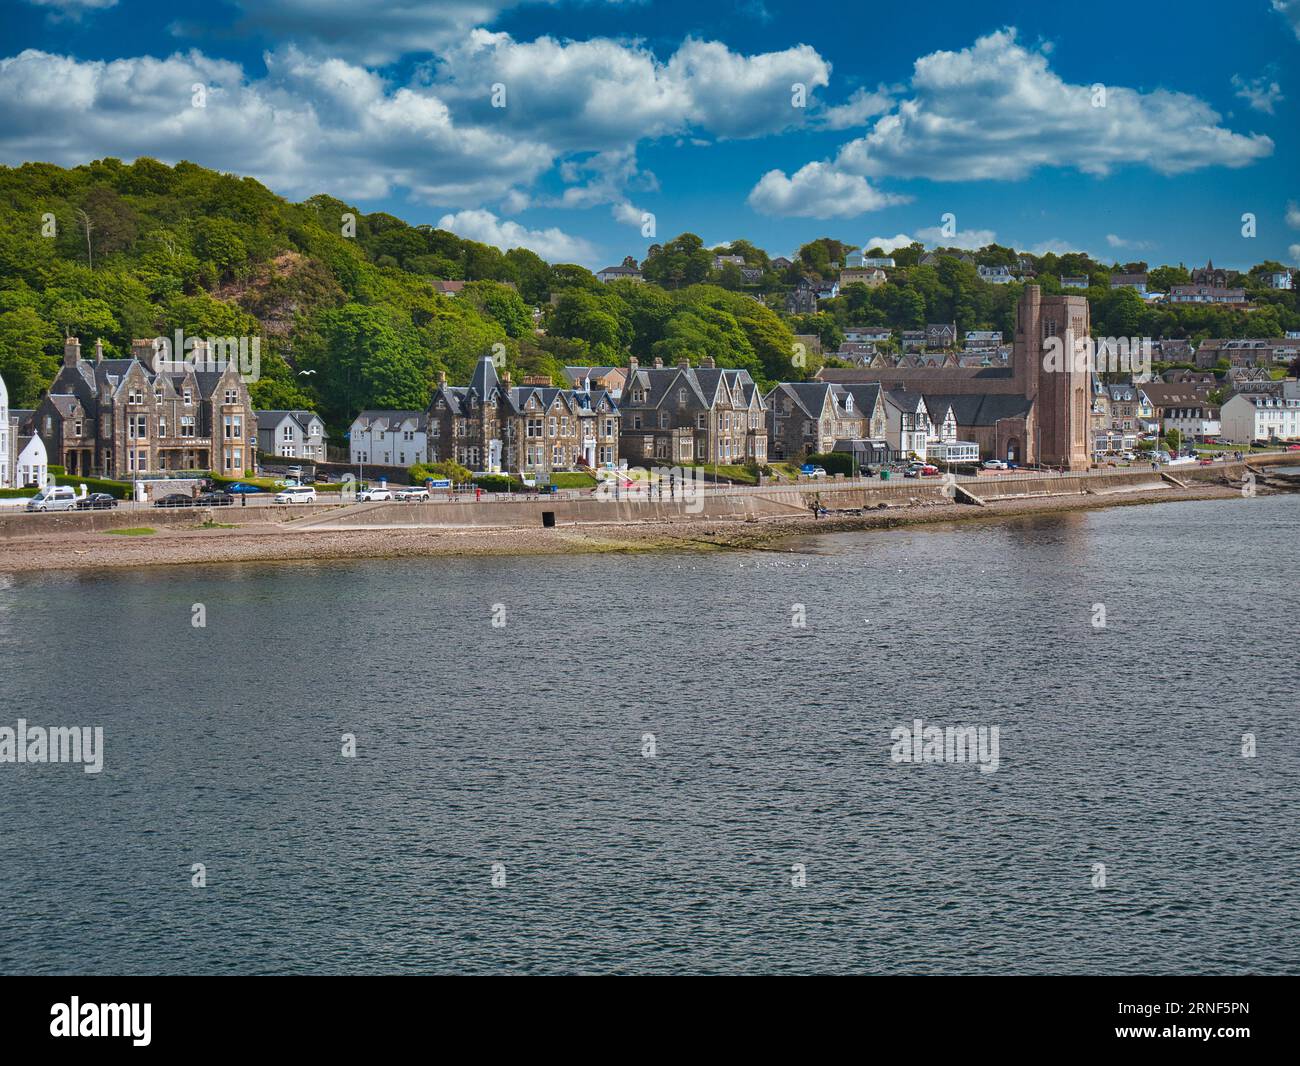 Corran Esplanade in Oban from the ferry to Barra passing through Oban Bay - Hotels and St Columba's Cathedral appear on the right of the image, with t Stock Photo